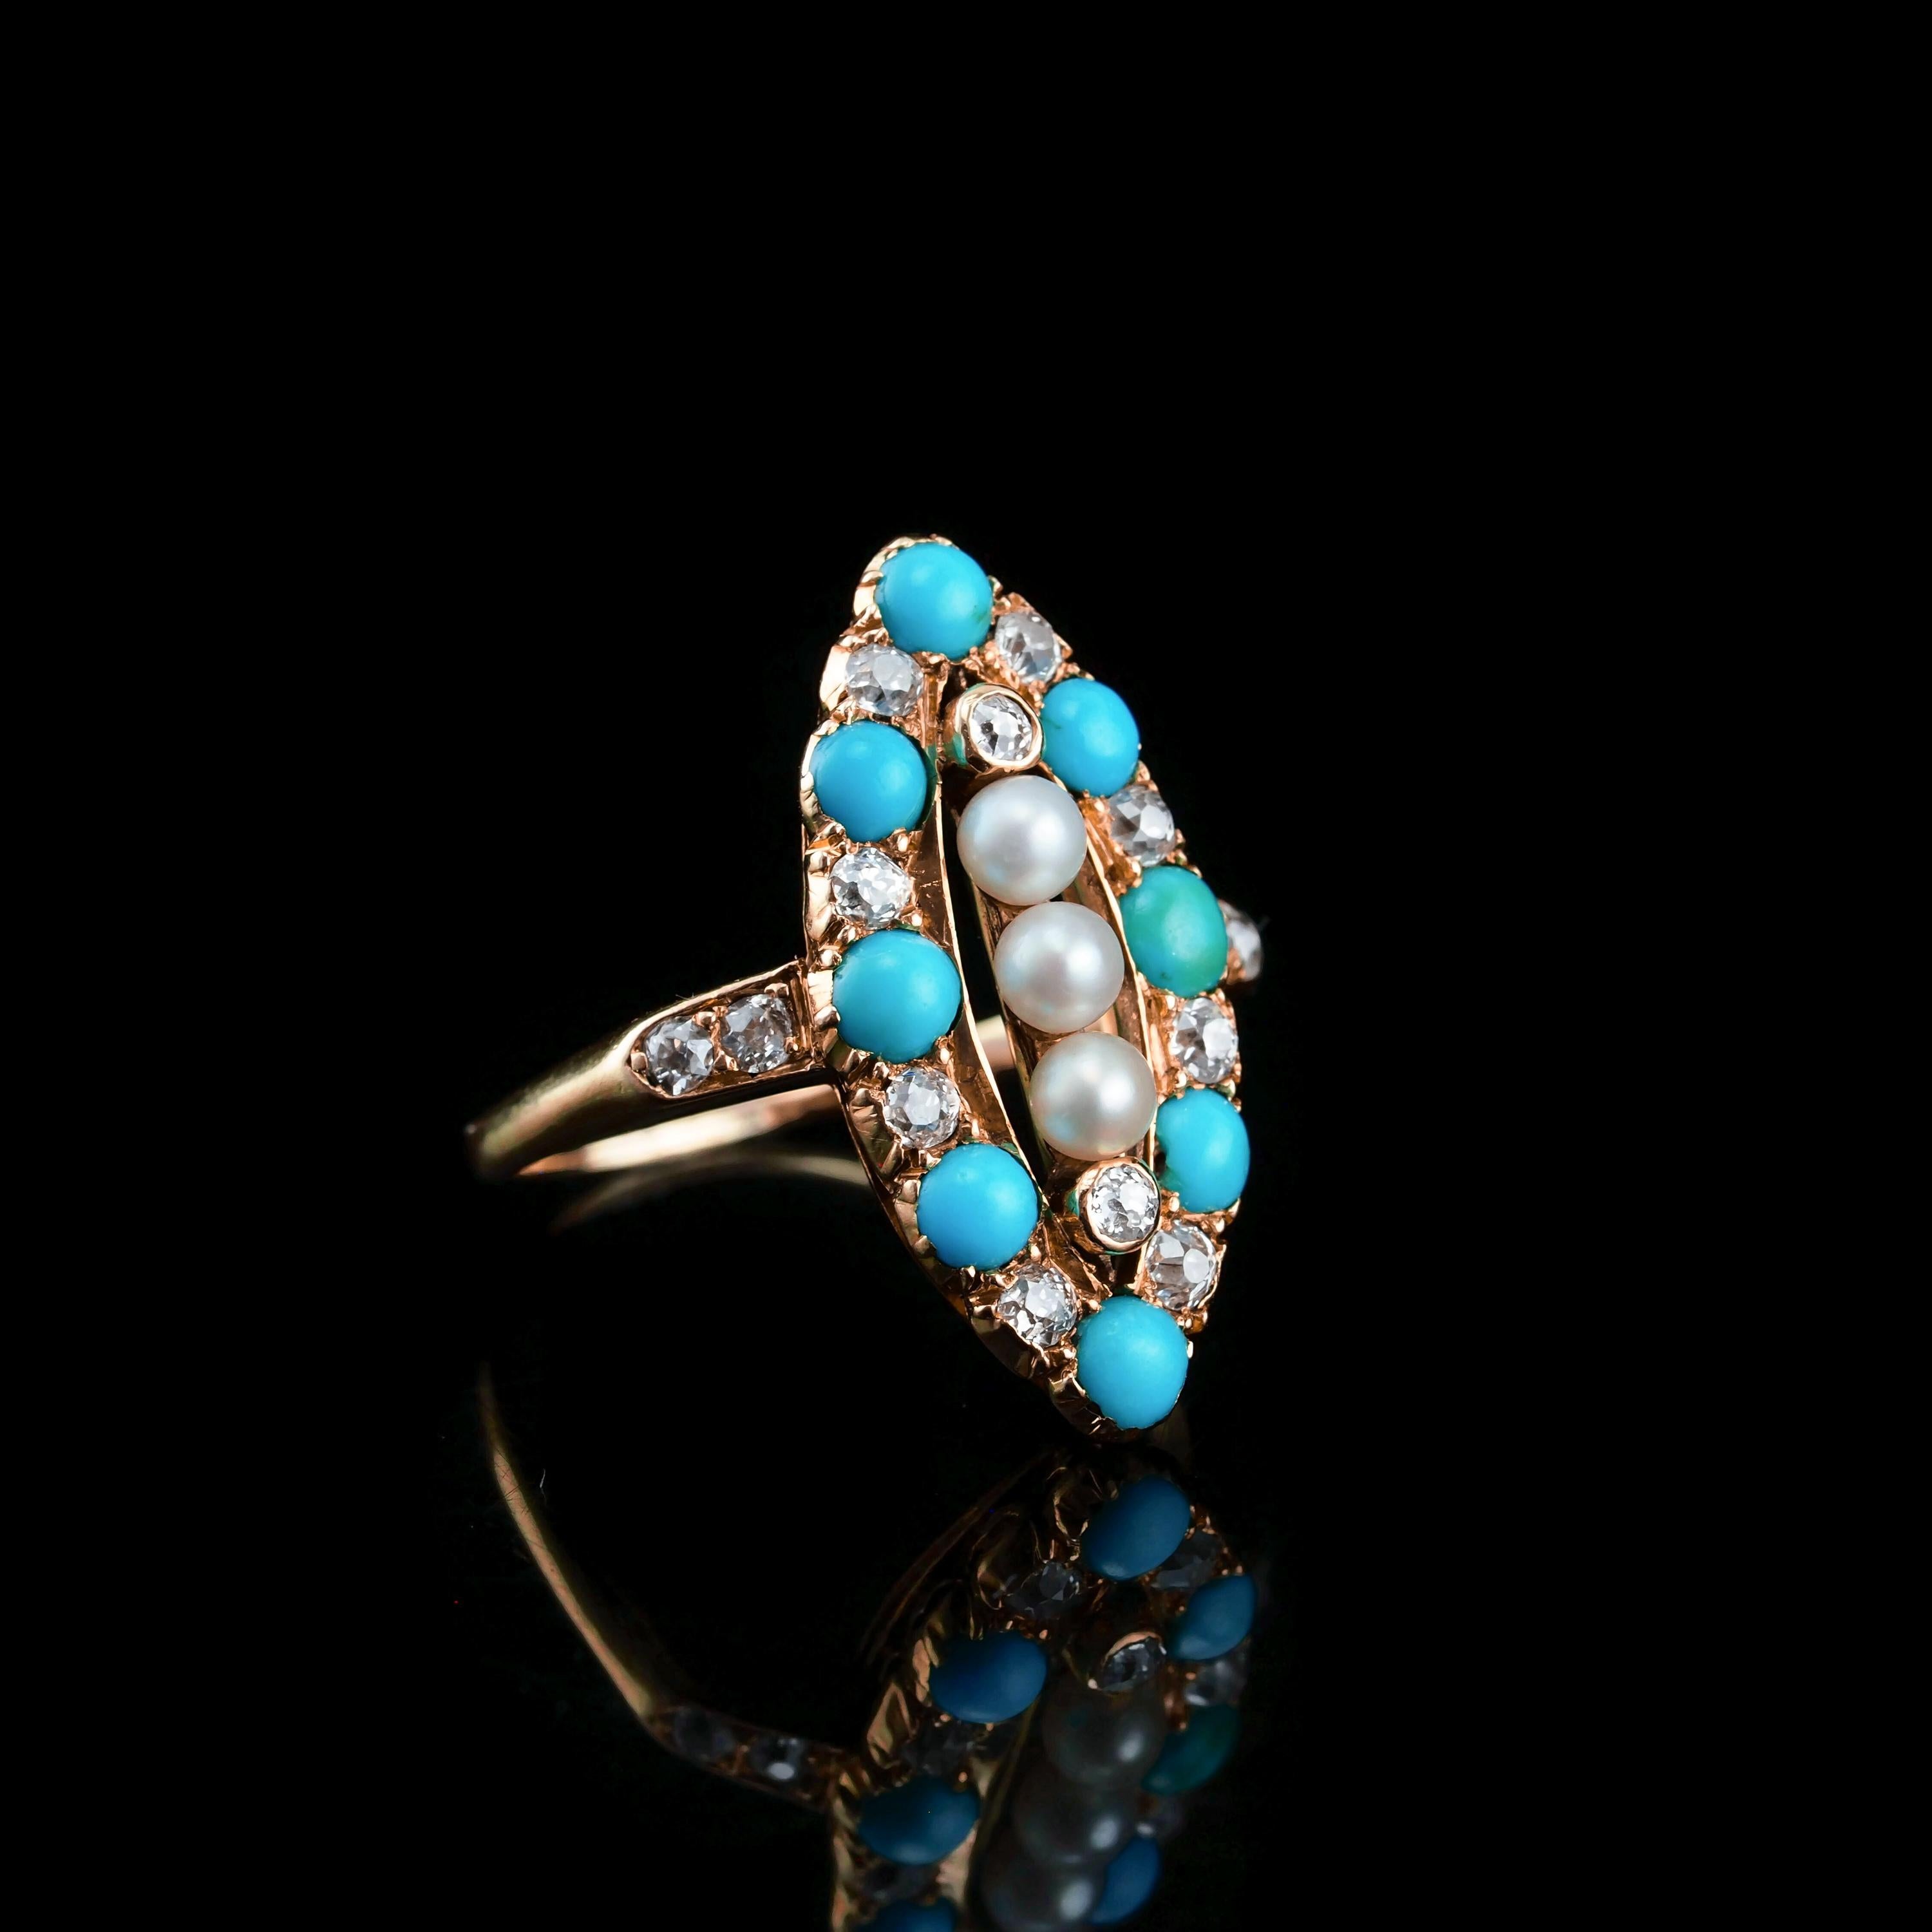 Antique Victorian Diamond Pearl Turquoise 18K Gold Ring Navette/Marquise c.1880 For Sale 5